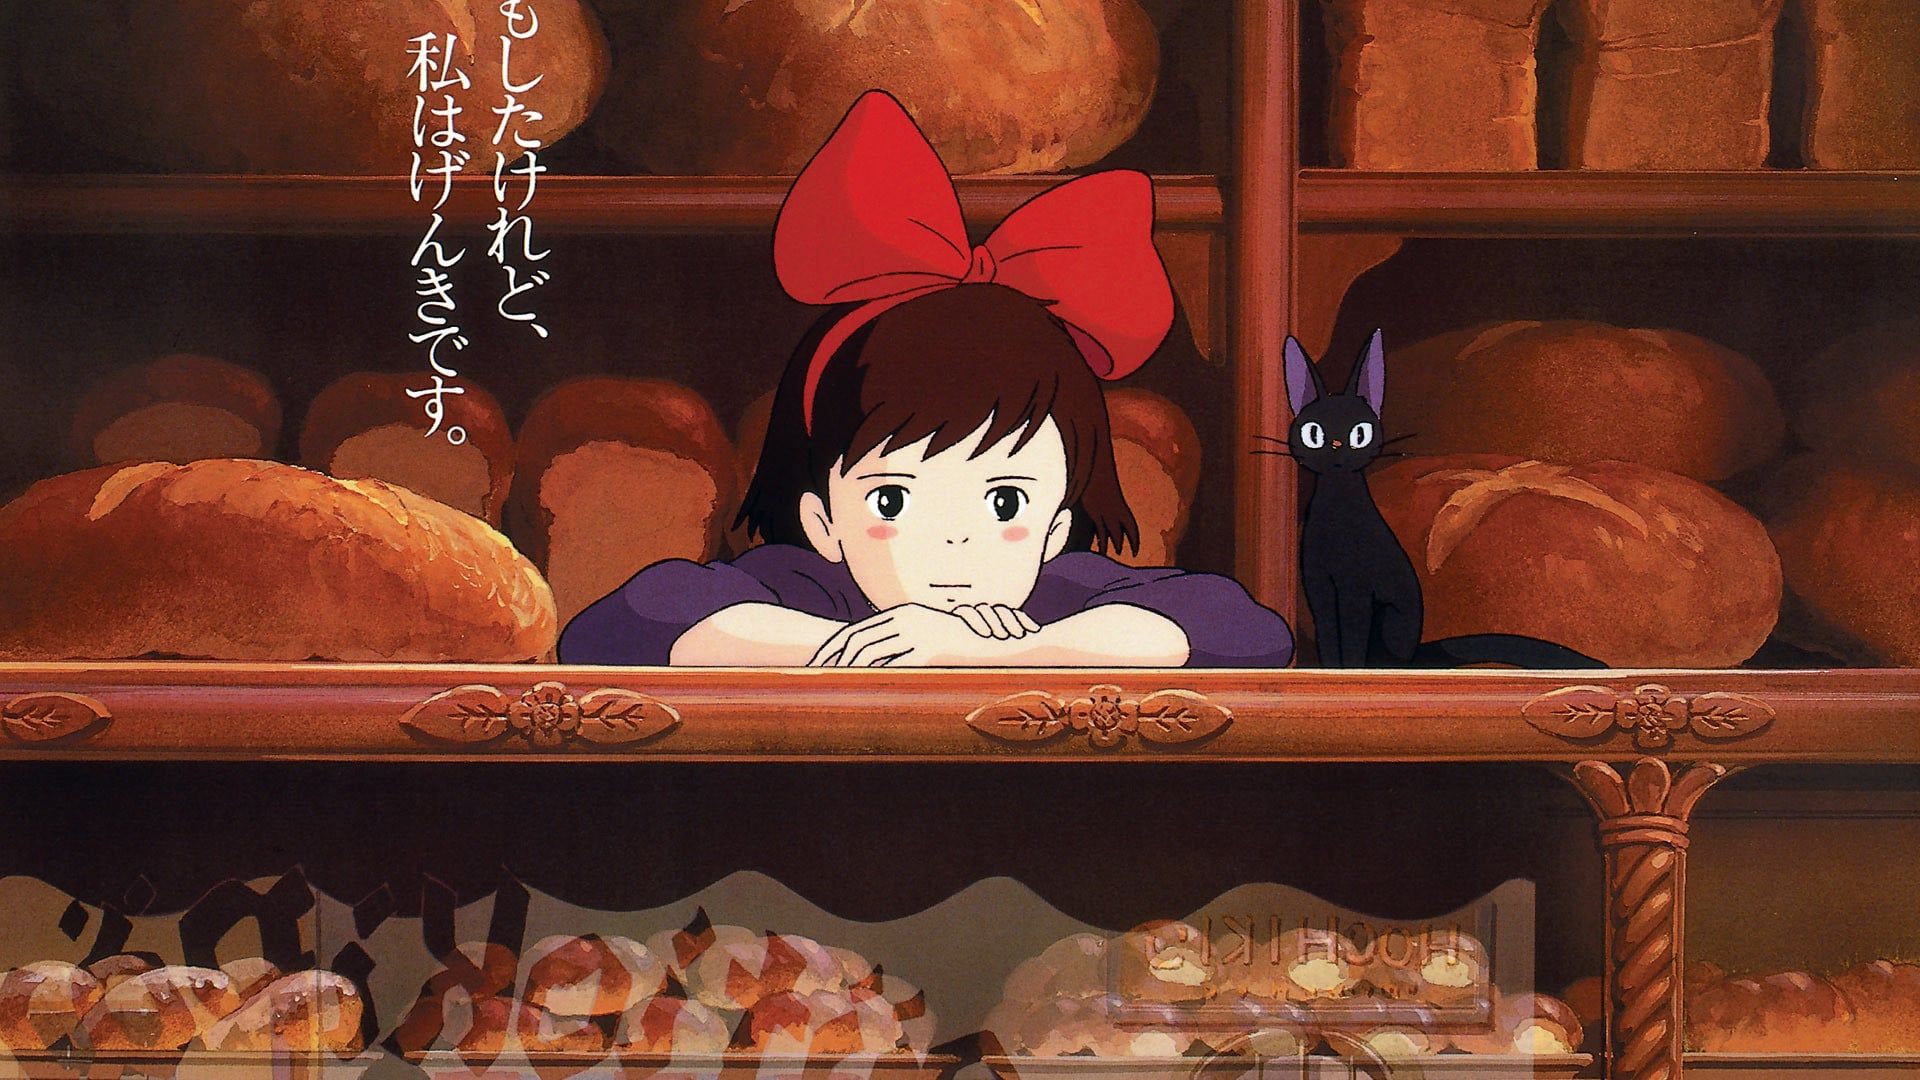 kikis delivery service HD wallpaper, background